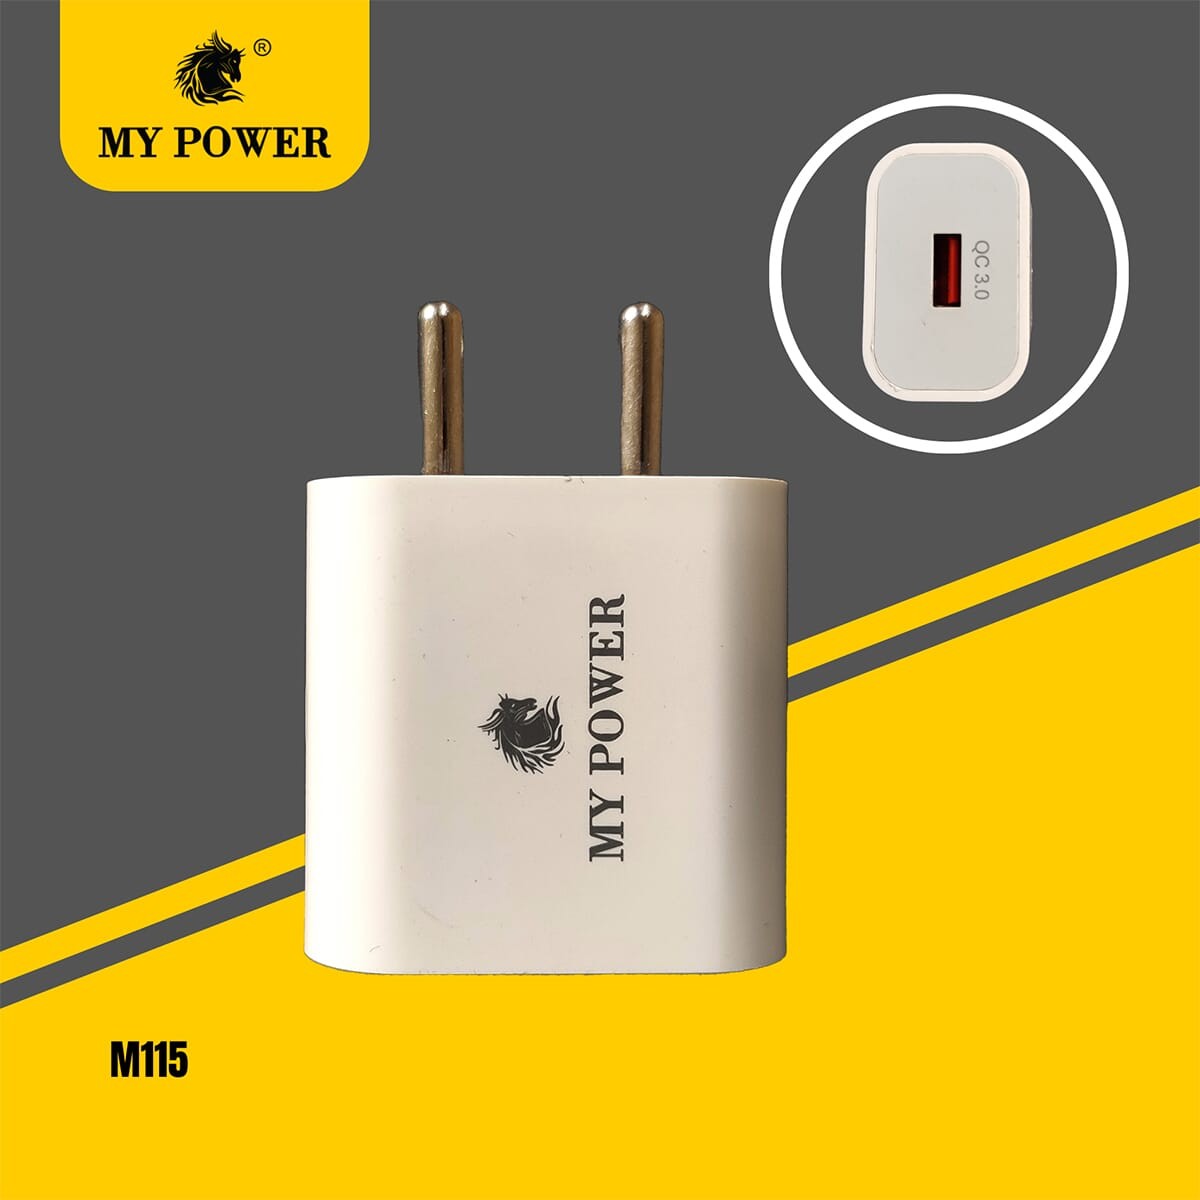 My Power 15-watt Quick Charger 3.0, Indian Pin, White Color With 6 Months of Warranty